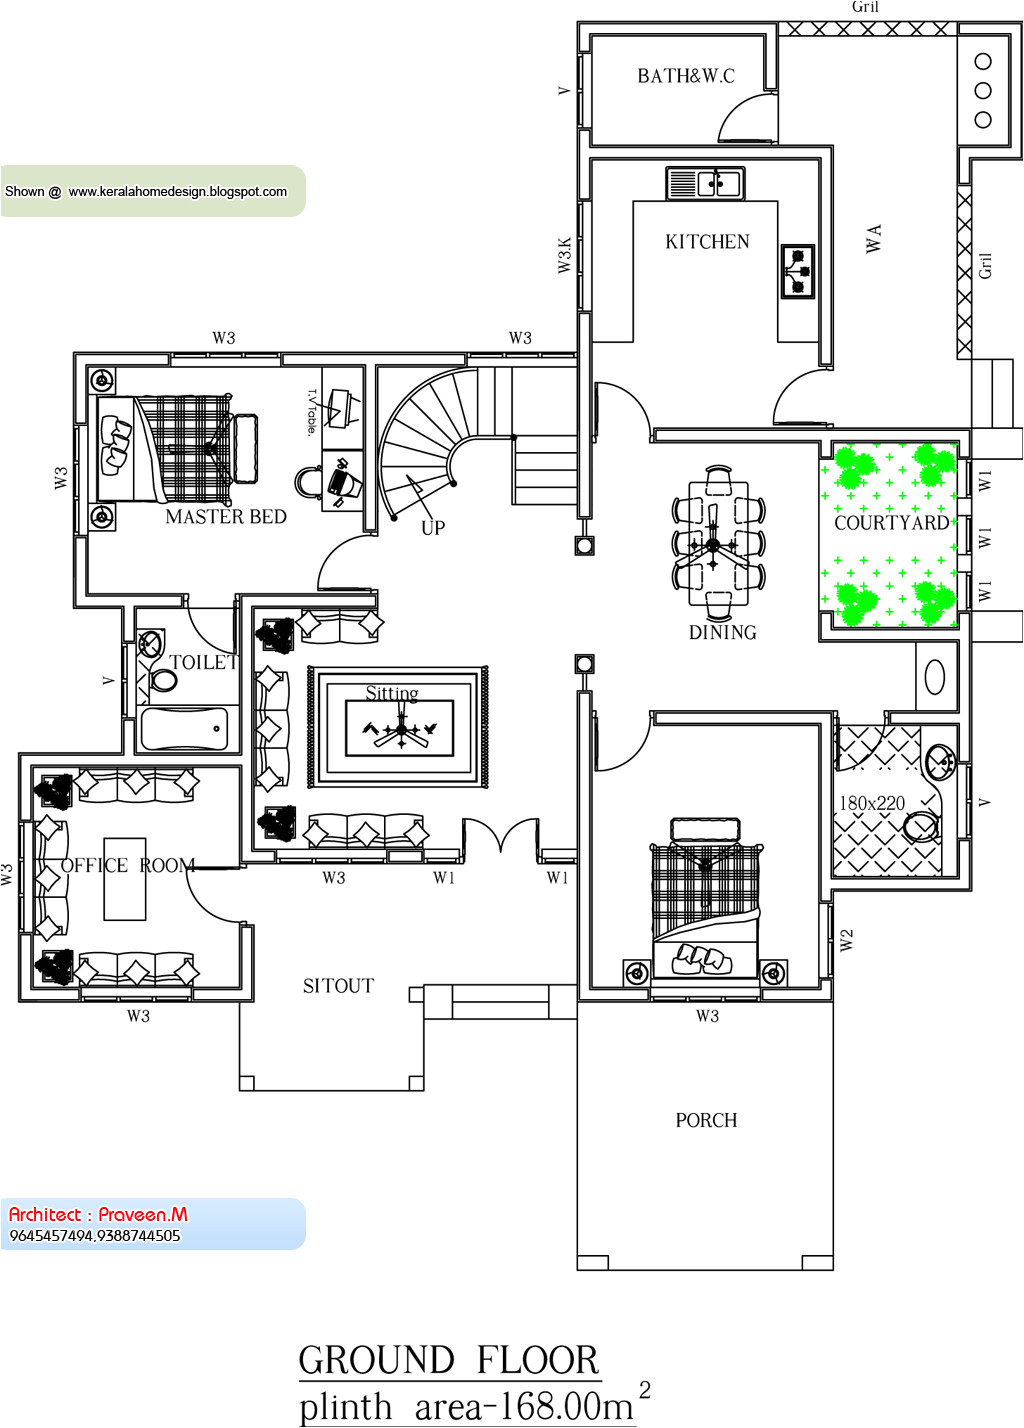 Free Kerala Home Plans August 2010 Kerala Home Design and Floor Plans